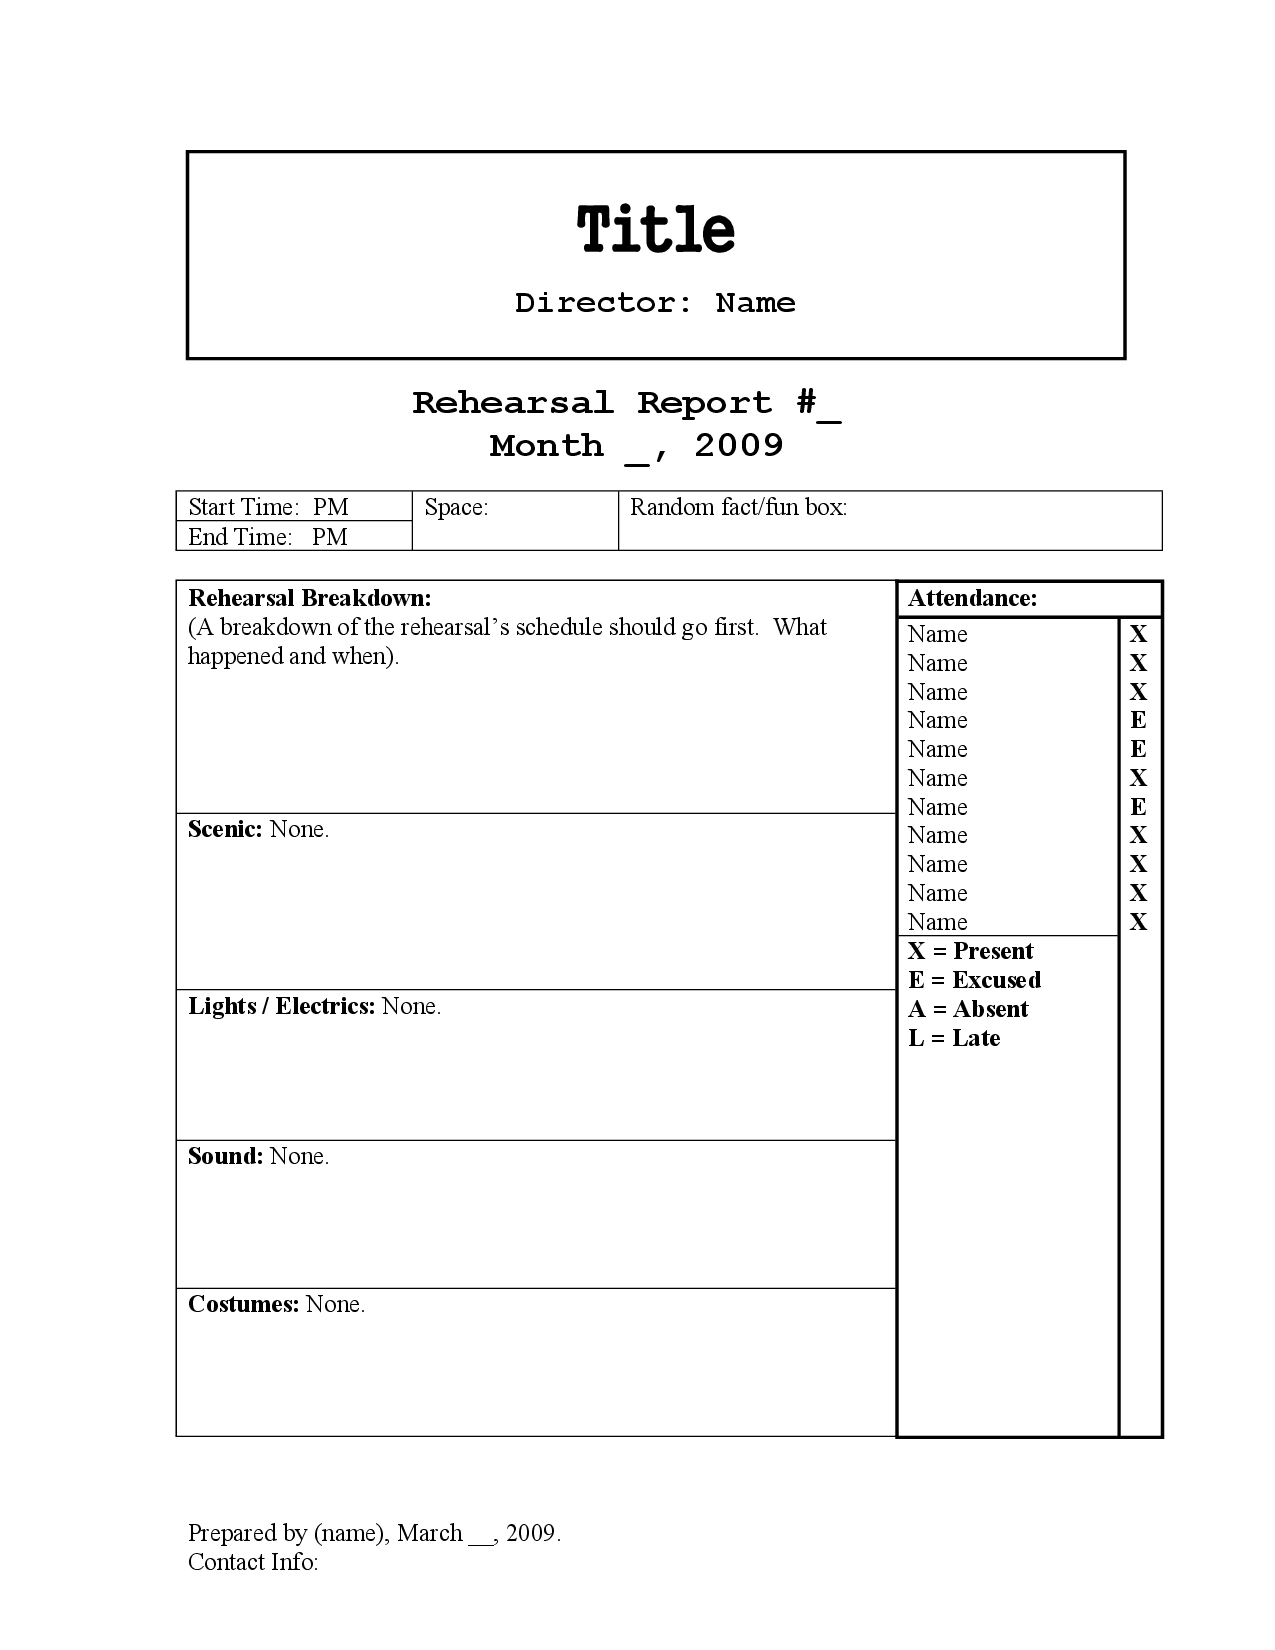 Rehearsal Report Template | Stage Manager In 2019 | Project With Rehearsal Report Template